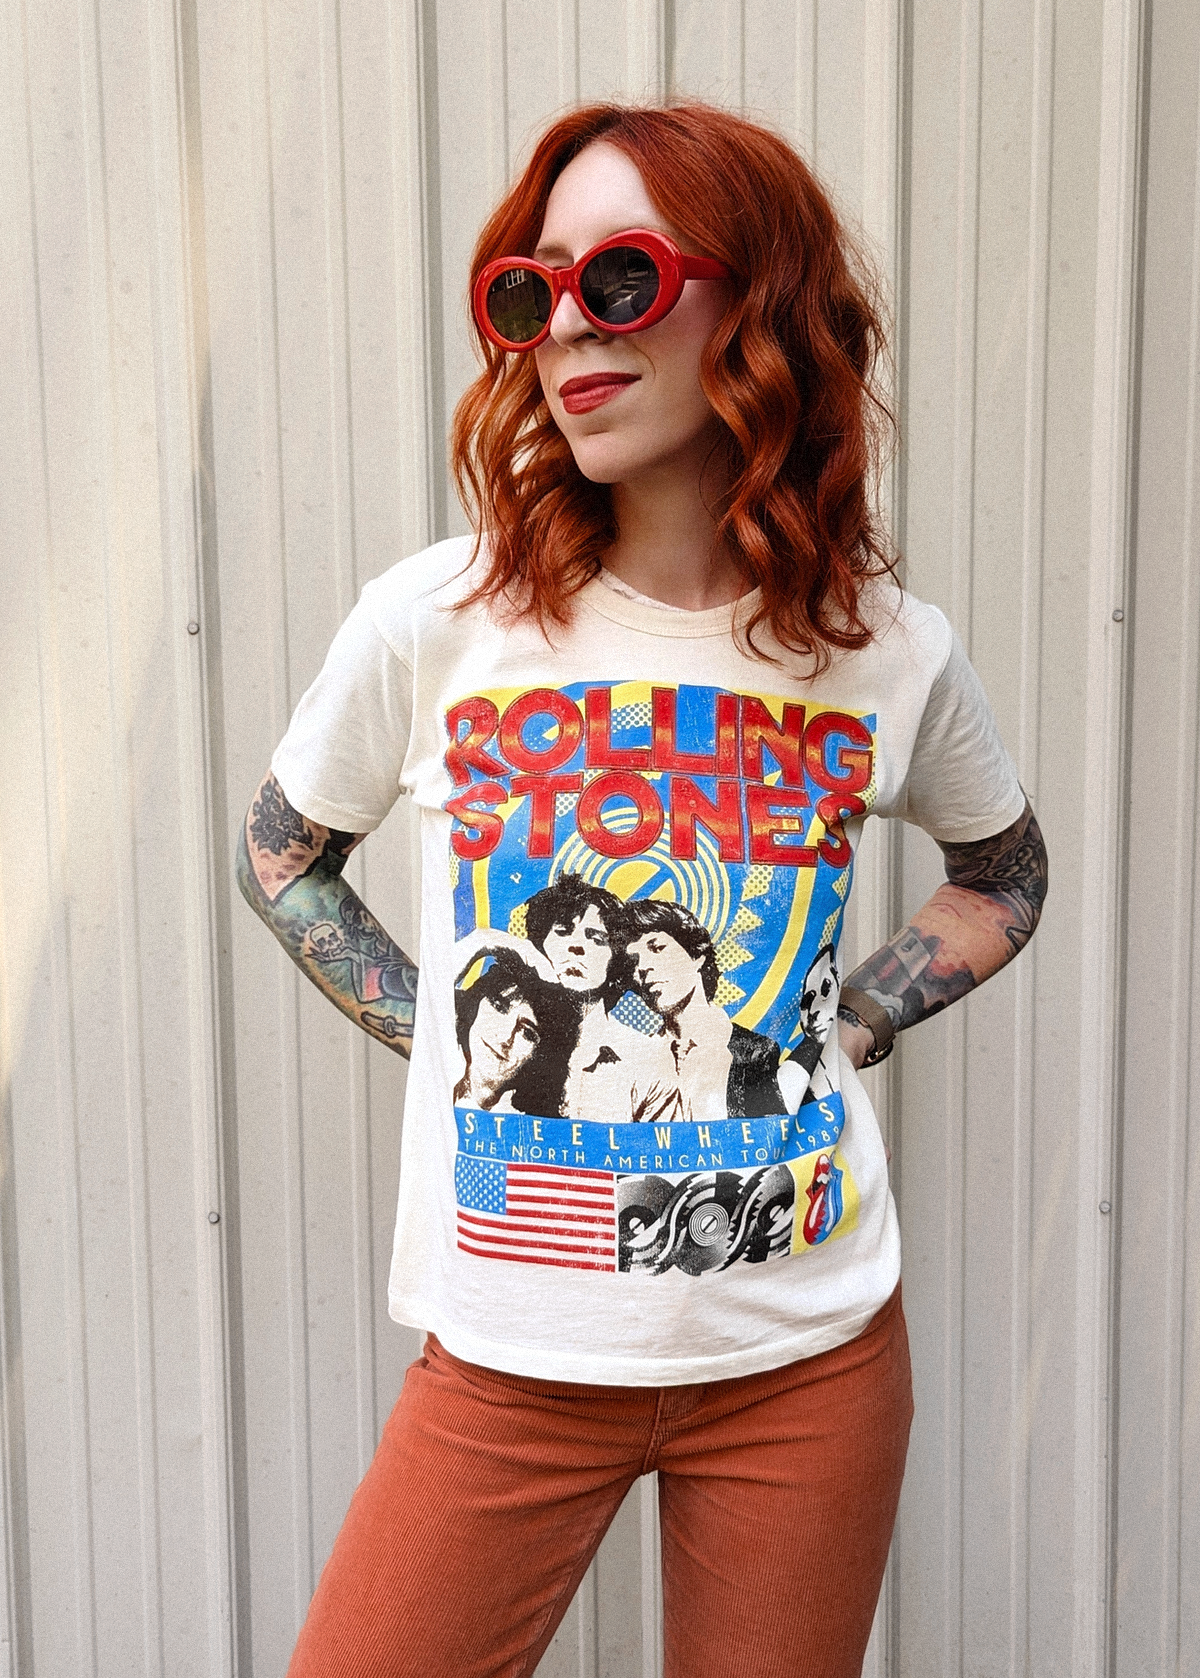 Rolling Stones Steel Wheels Tour 1989 Tee by Daydreamer LA - officially licensed and made in California